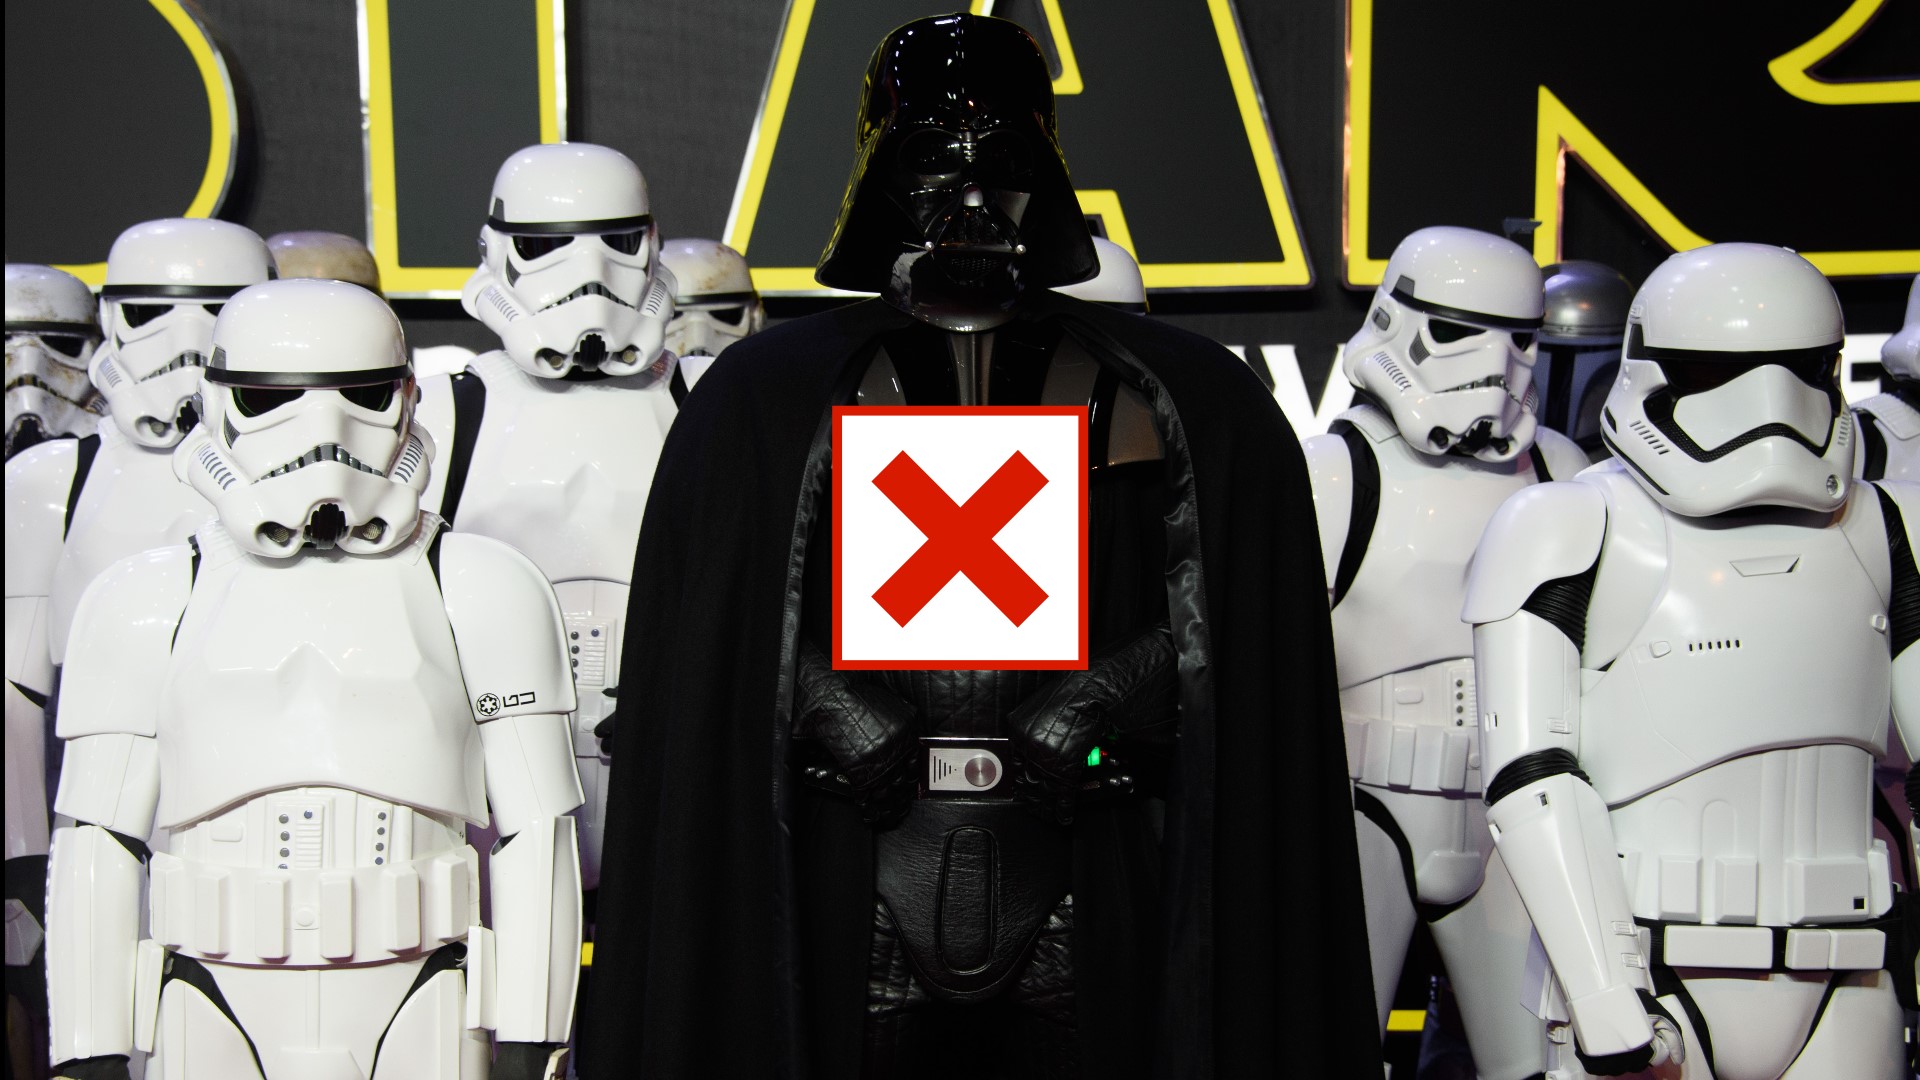 No, Darth Vader does not say, ‘Luke, I am your father’